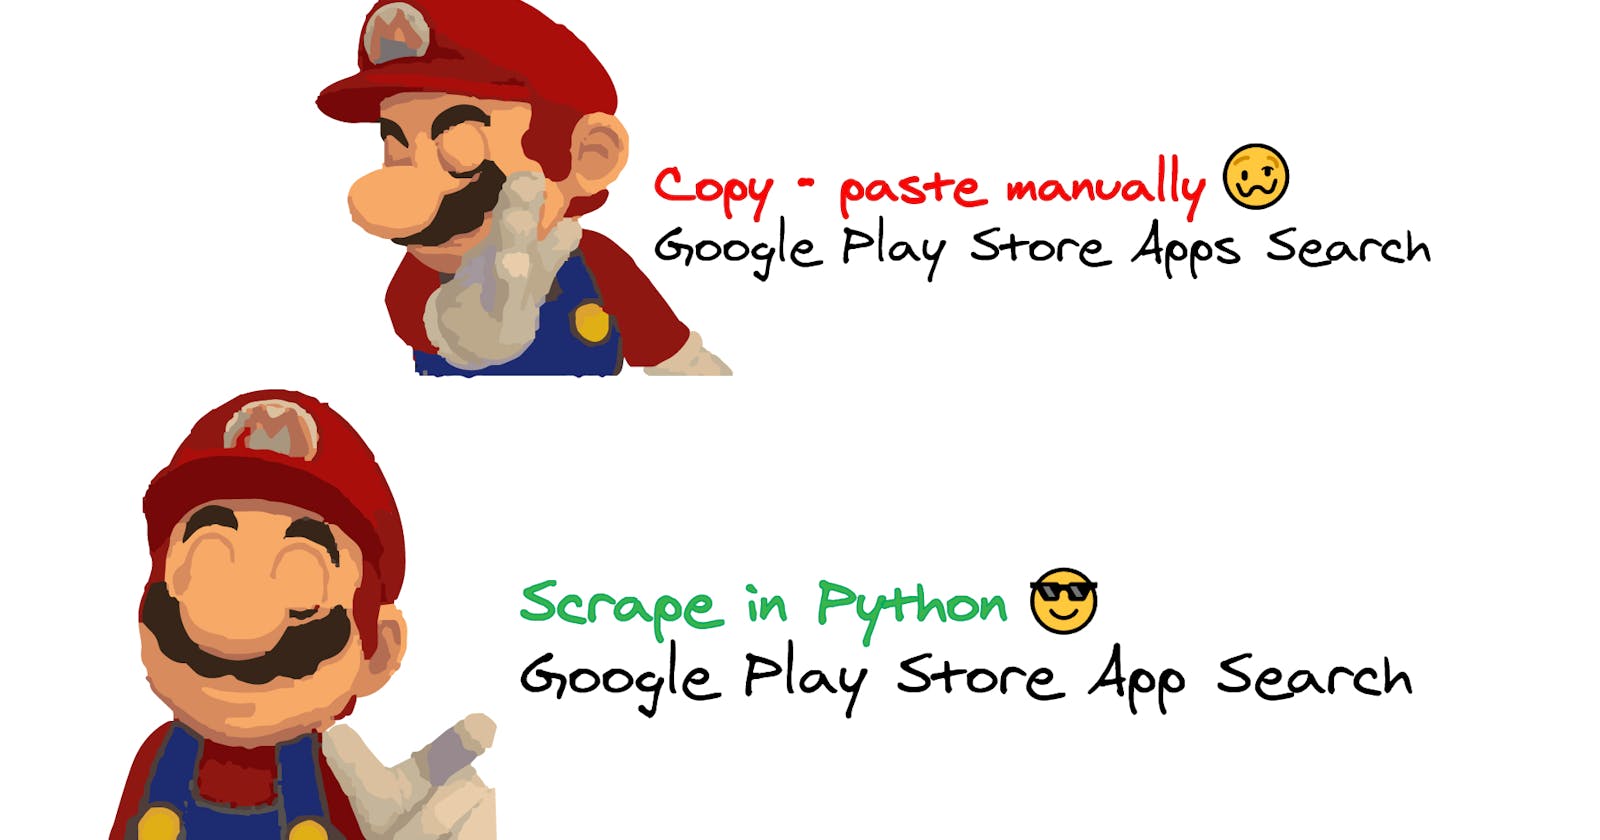 Scrape Google Play Search Apps with Python